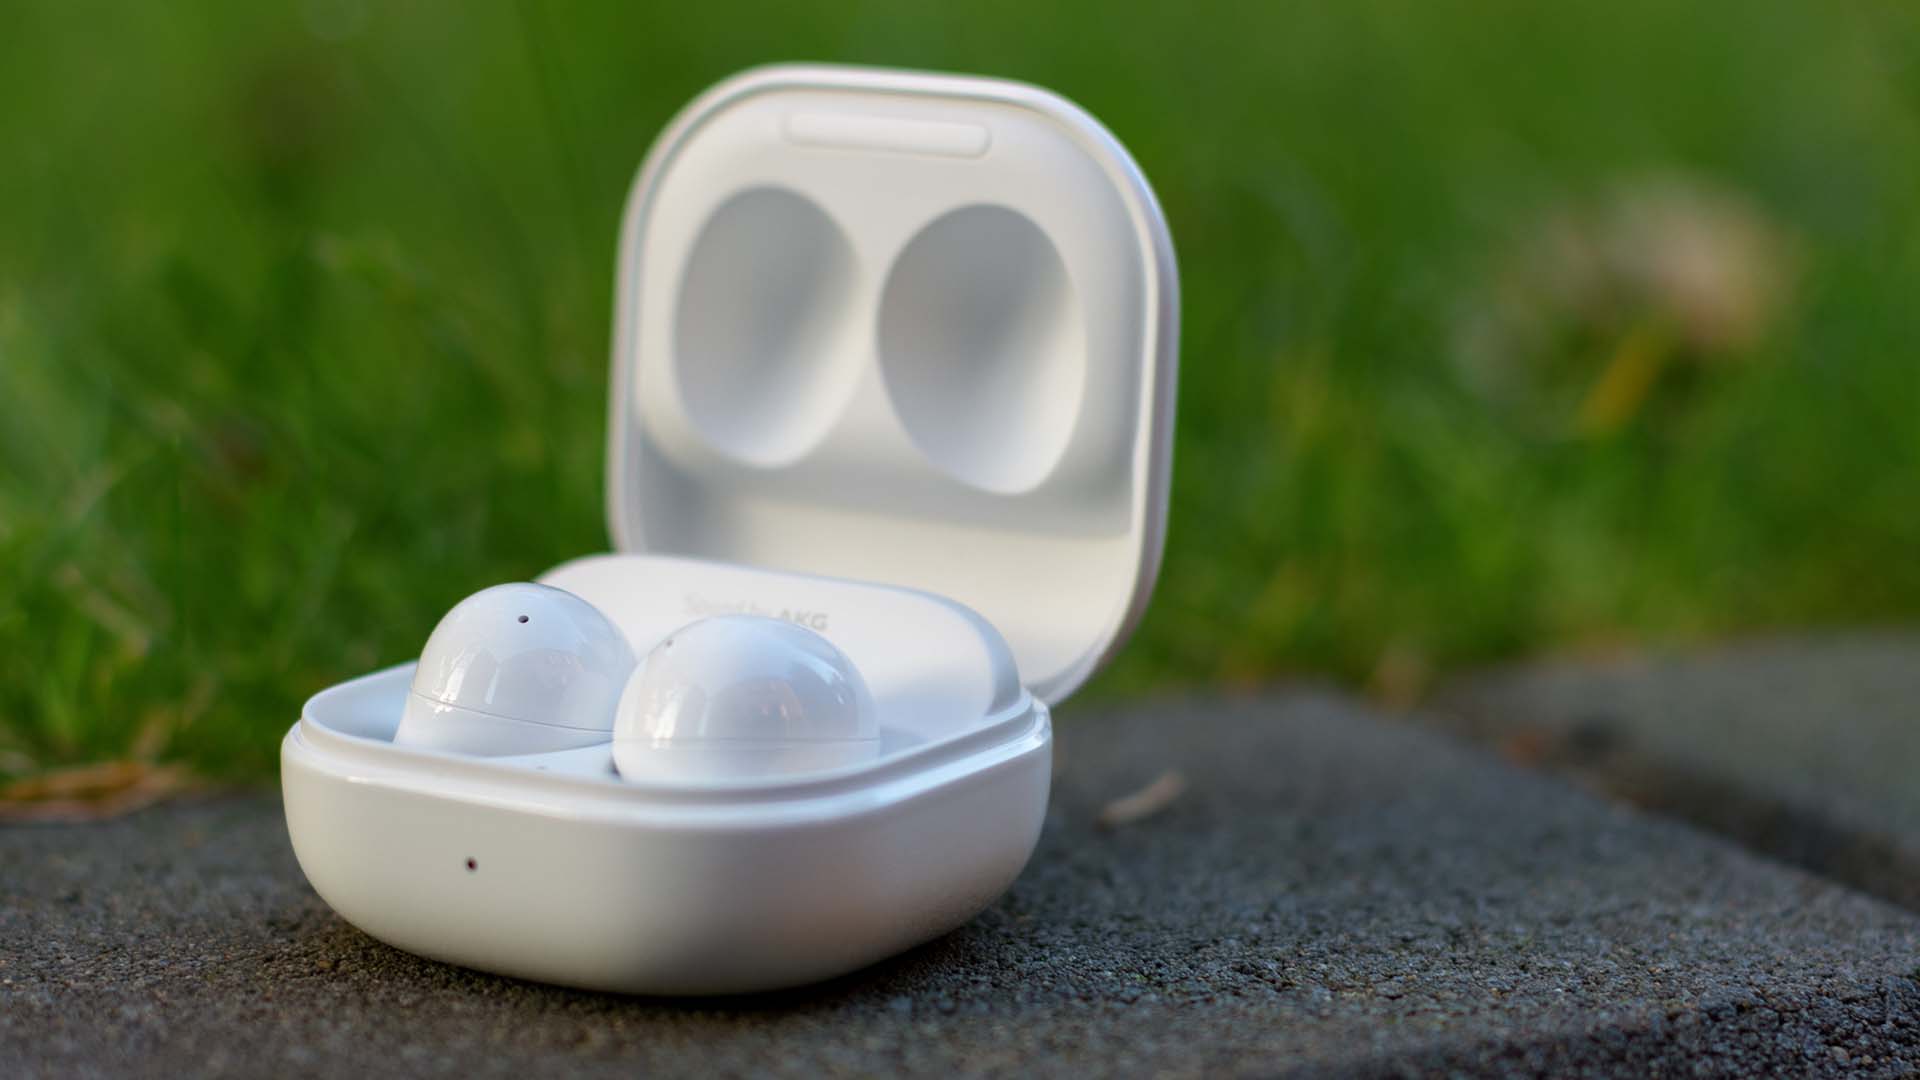 Galaxy Buds 2 review: Samsung shrinks its wireless earbuds - CNET